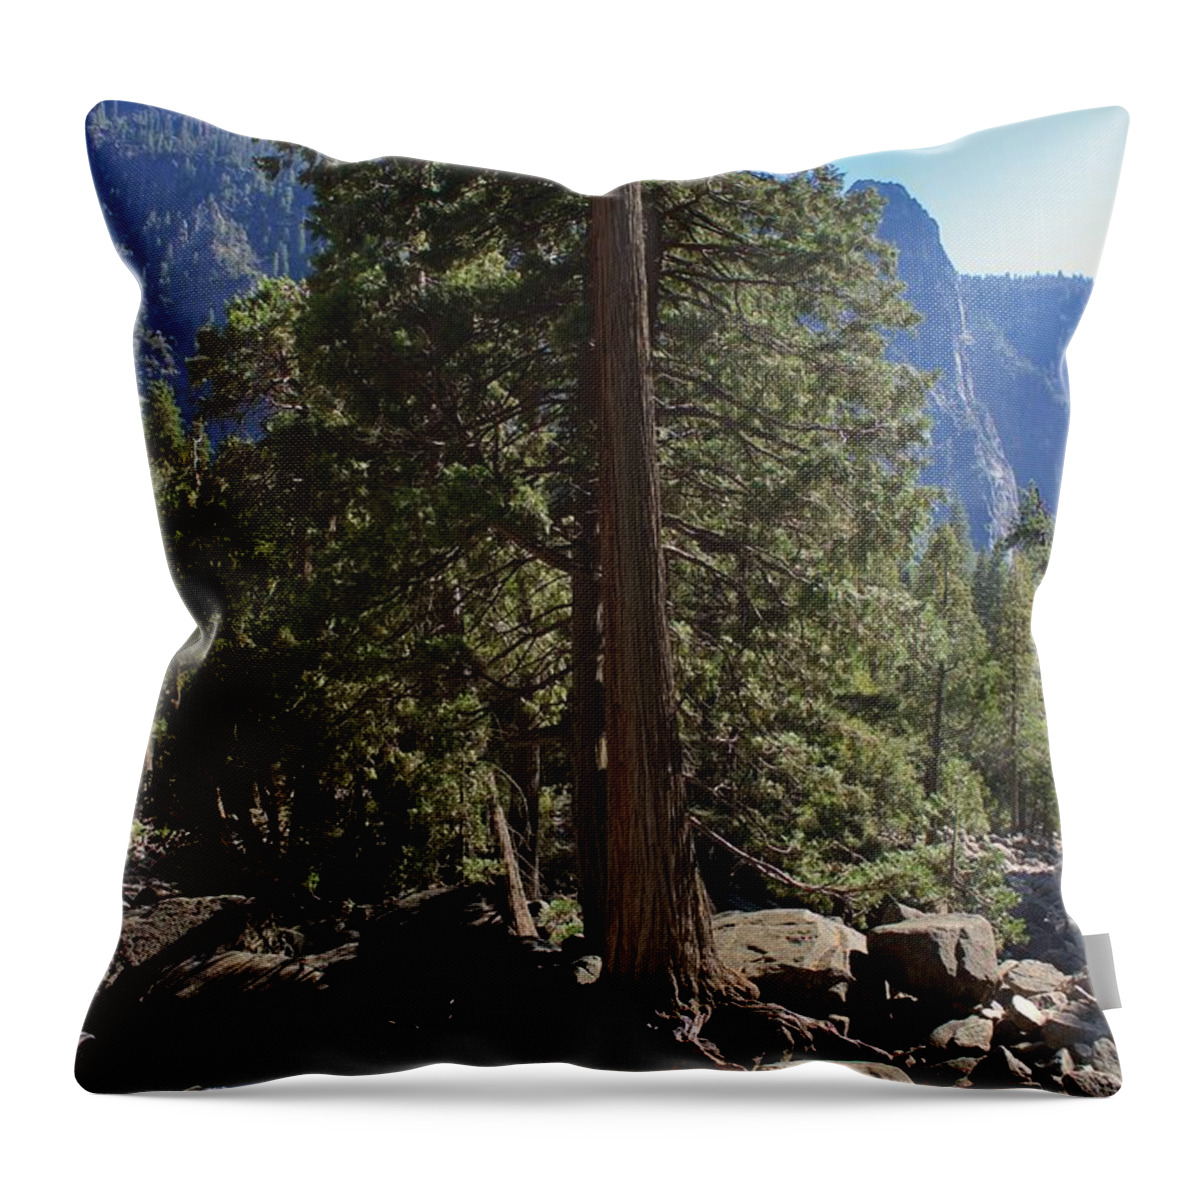 Fall Throw Pillow featuring the photograph Dry Season by Dan Twomey